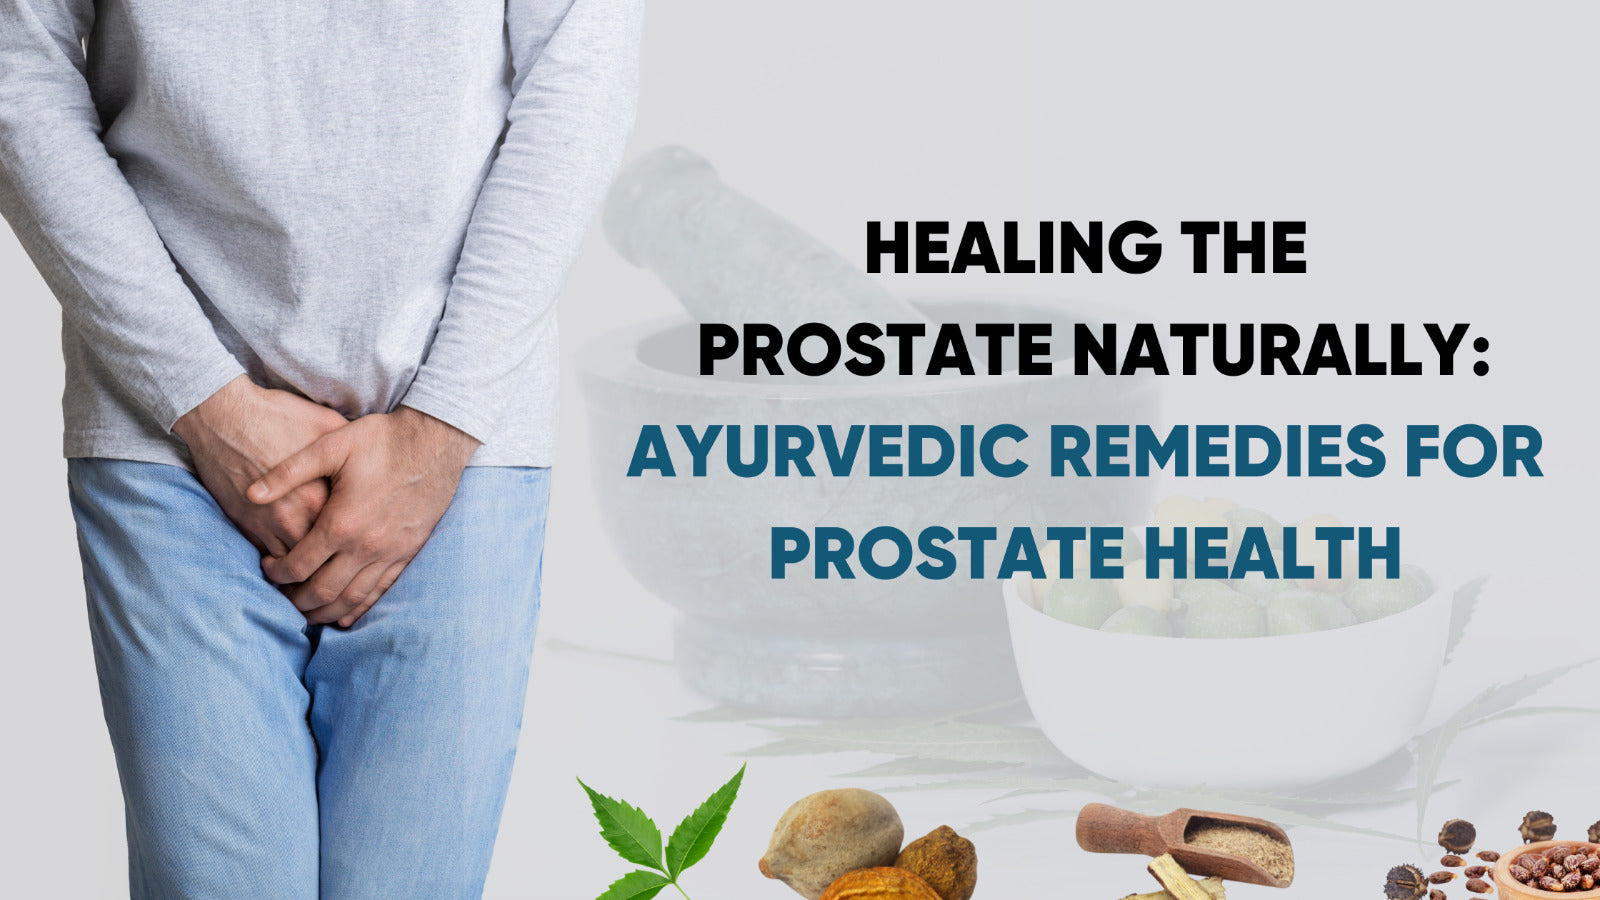 HEALING THE PROSTATE NATURALLY: AYURVEDIC REMEDIES FOR PROSTATE HEALTH